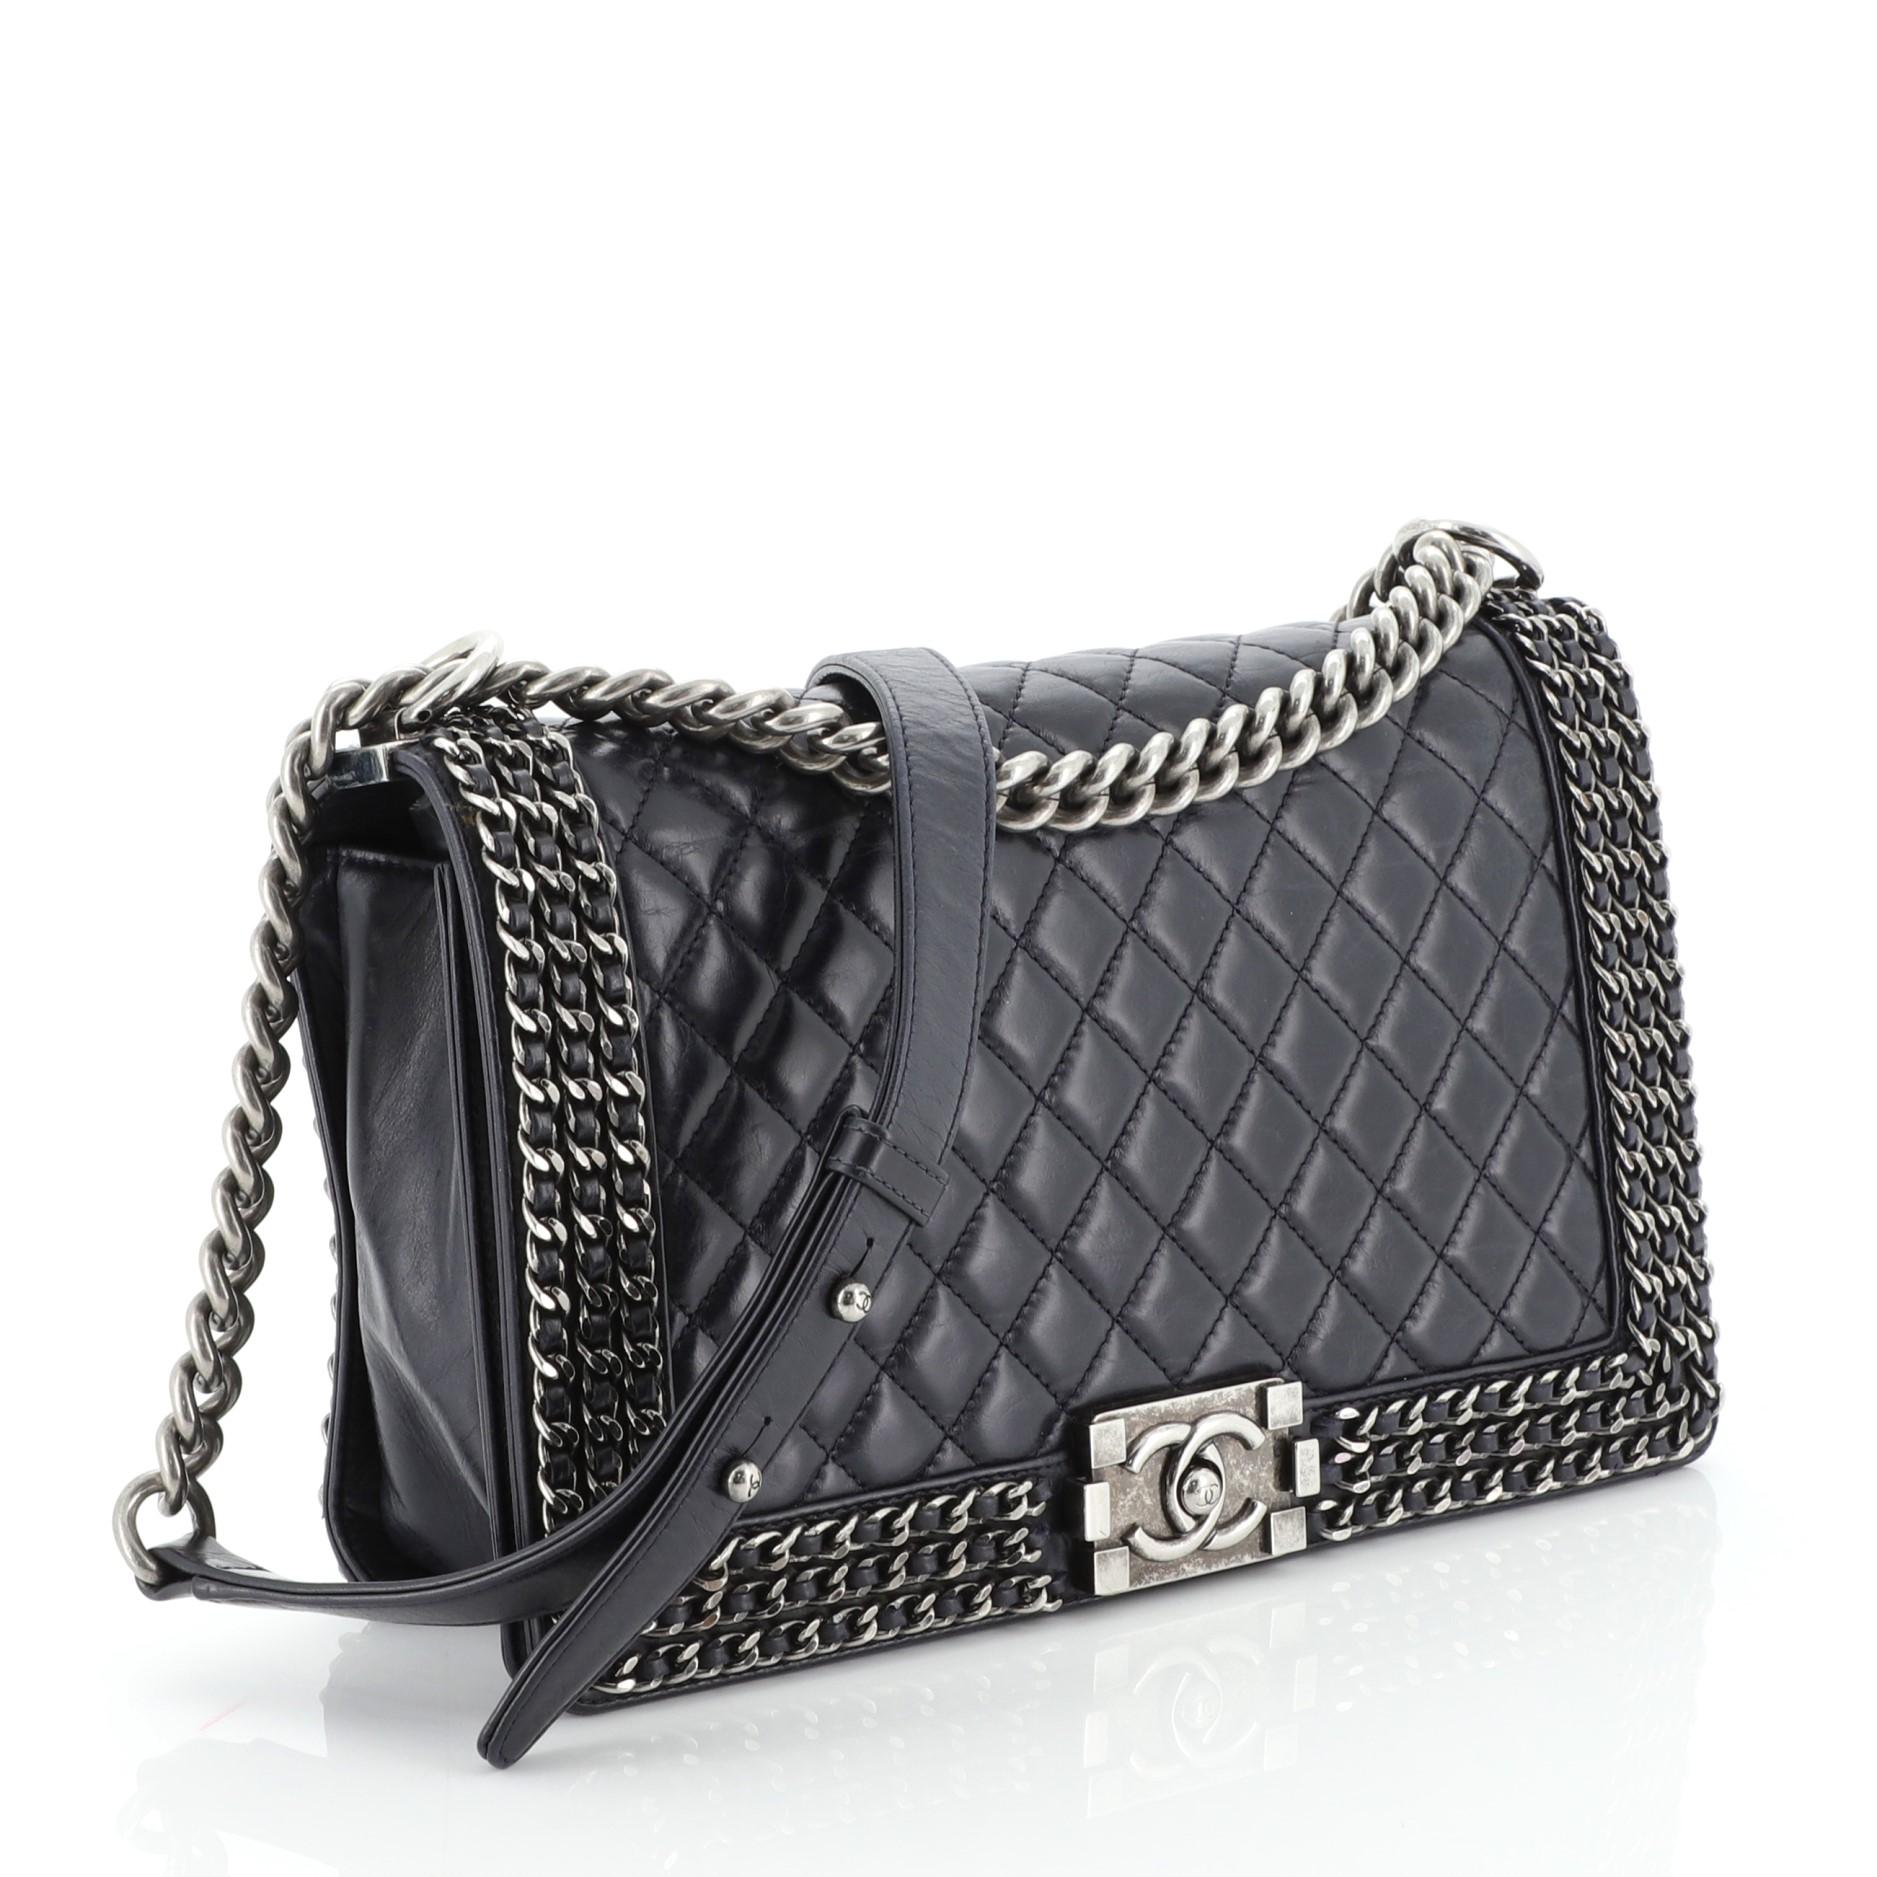 This Chanel Chained Boy Flap Bag Quilted Glazed Calfskin New Medium, crafted in blue quilted glazed calfskin, features chain link trim, chunky chain link strap with shoulder pad, and aged silver-tone hardware. Its CC boy push-lock closure opens to a